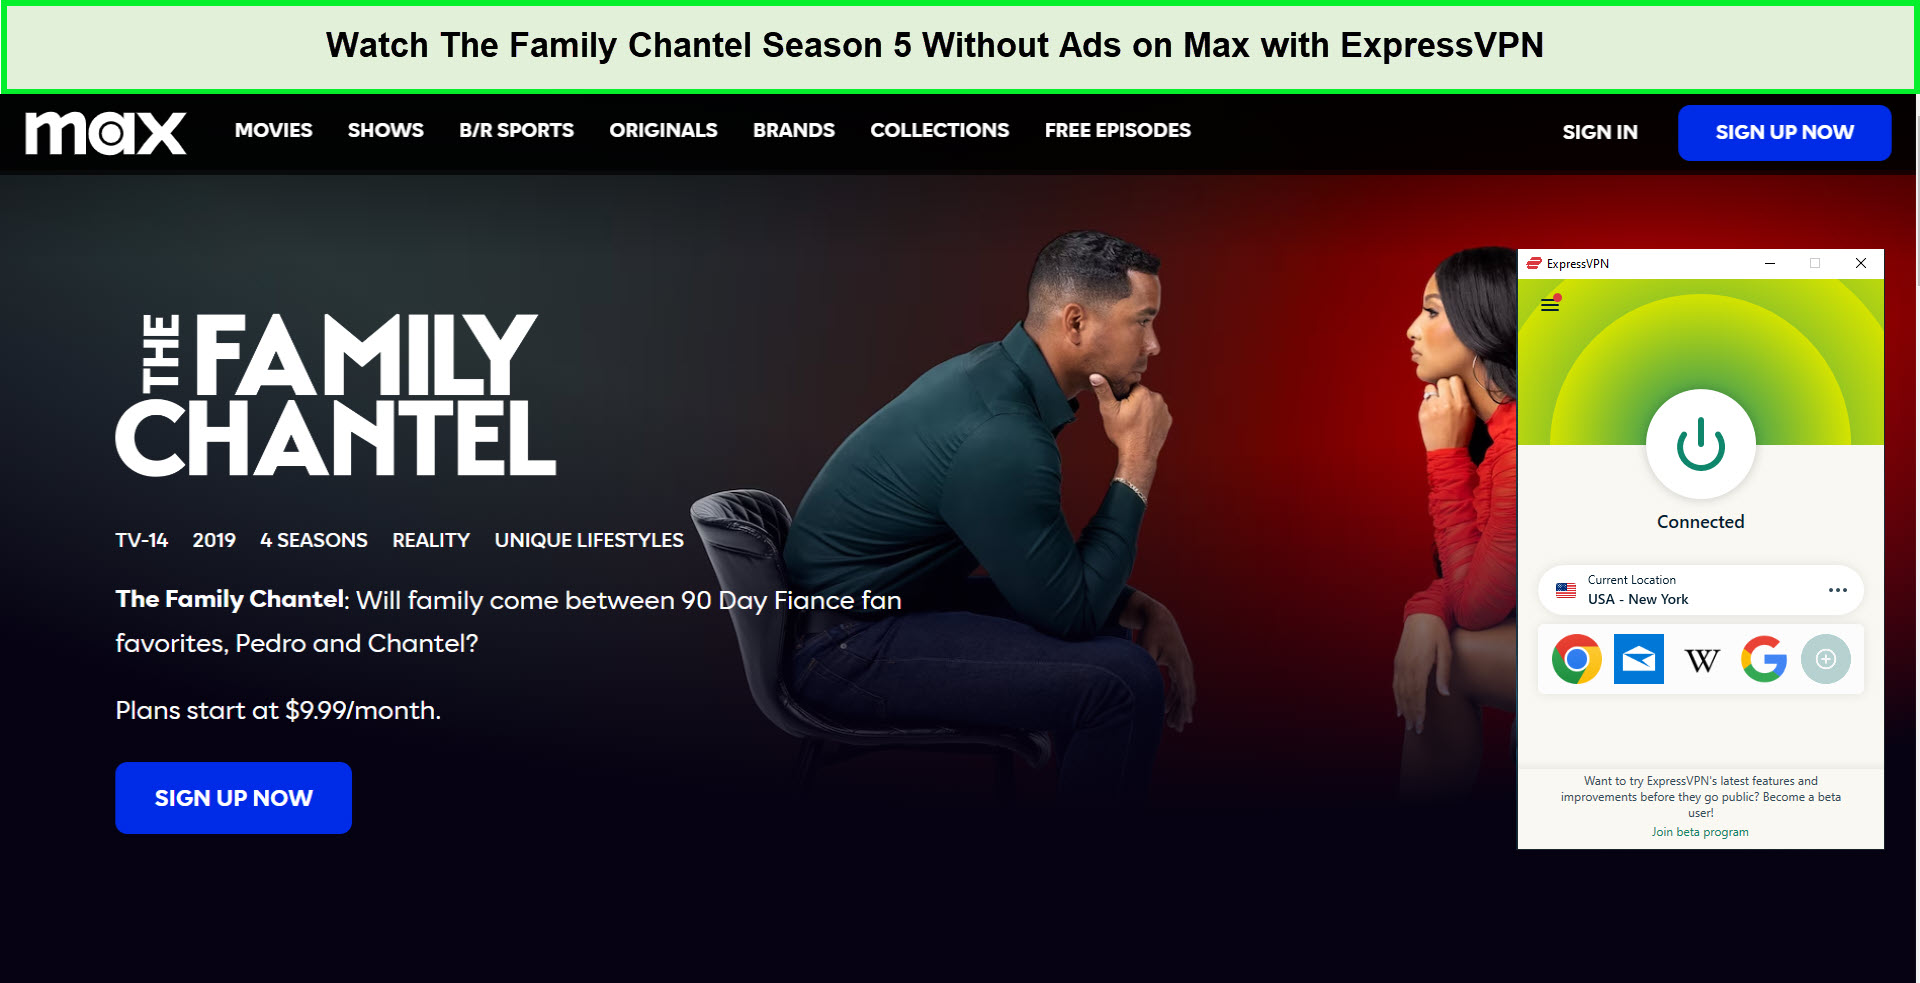 Watch-The-Family-Chantel-Season-5-Without-Ads-in-Australia-On-Max-with-ExpressPN